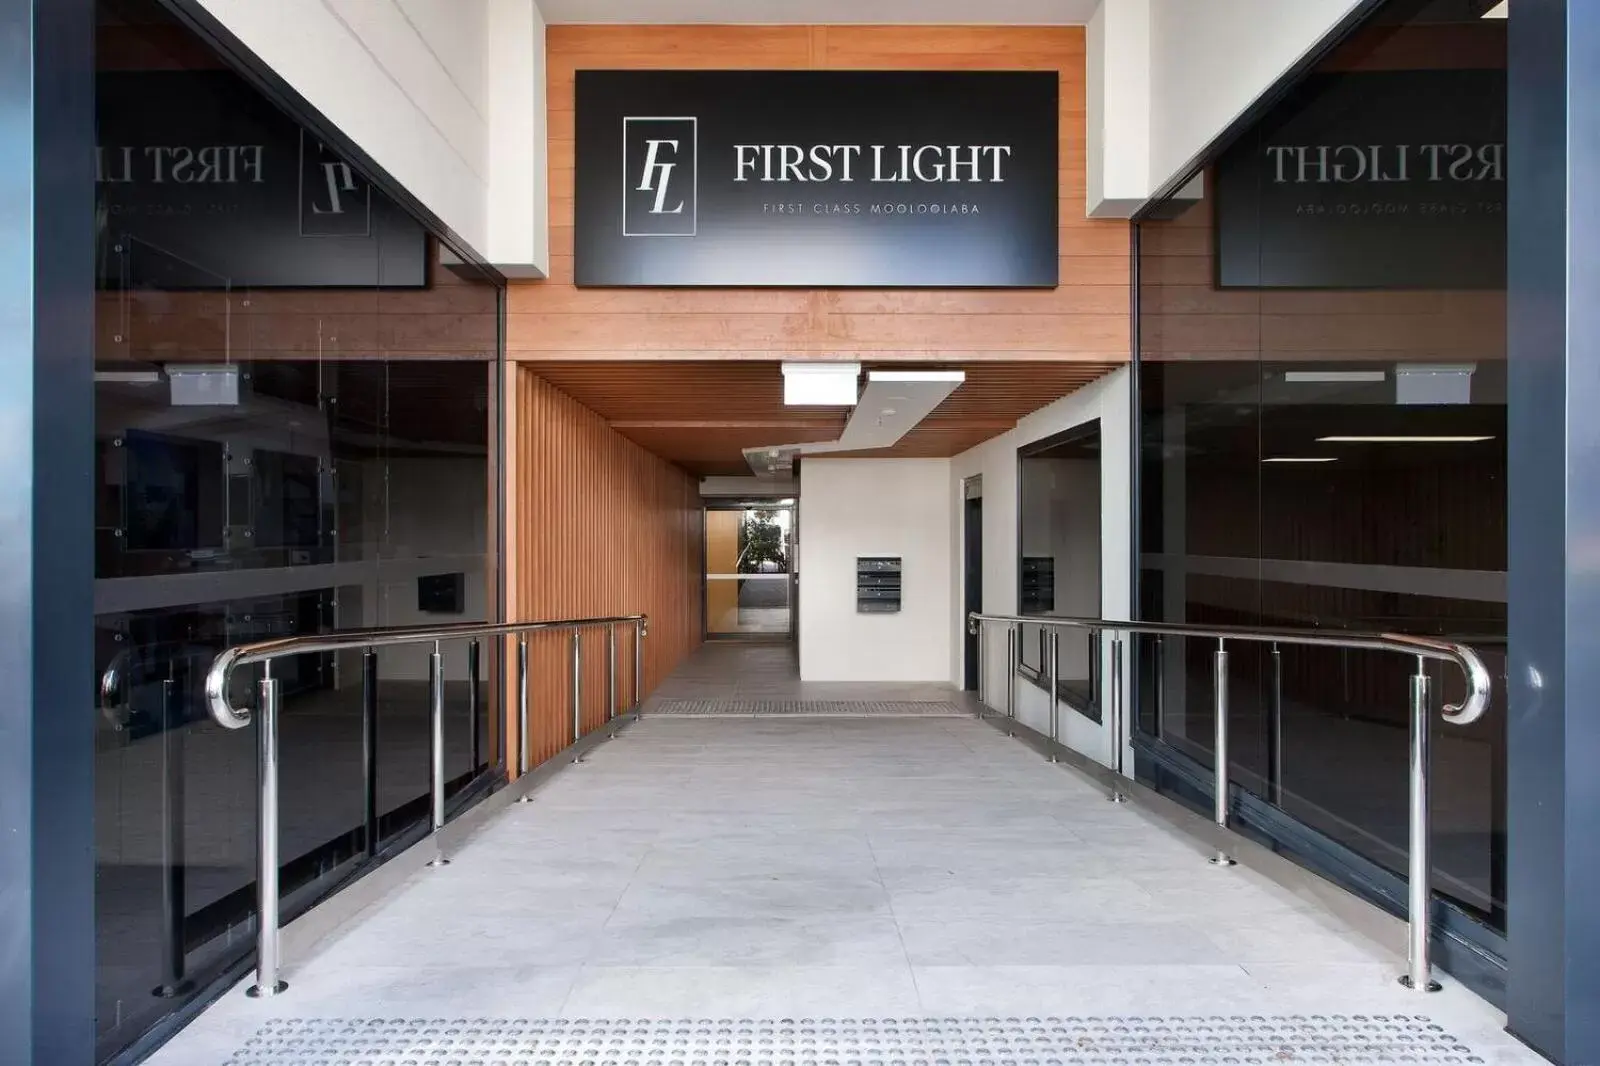 Facade/entrance in First Light Mooloolaba, Ascend Hotel Collection